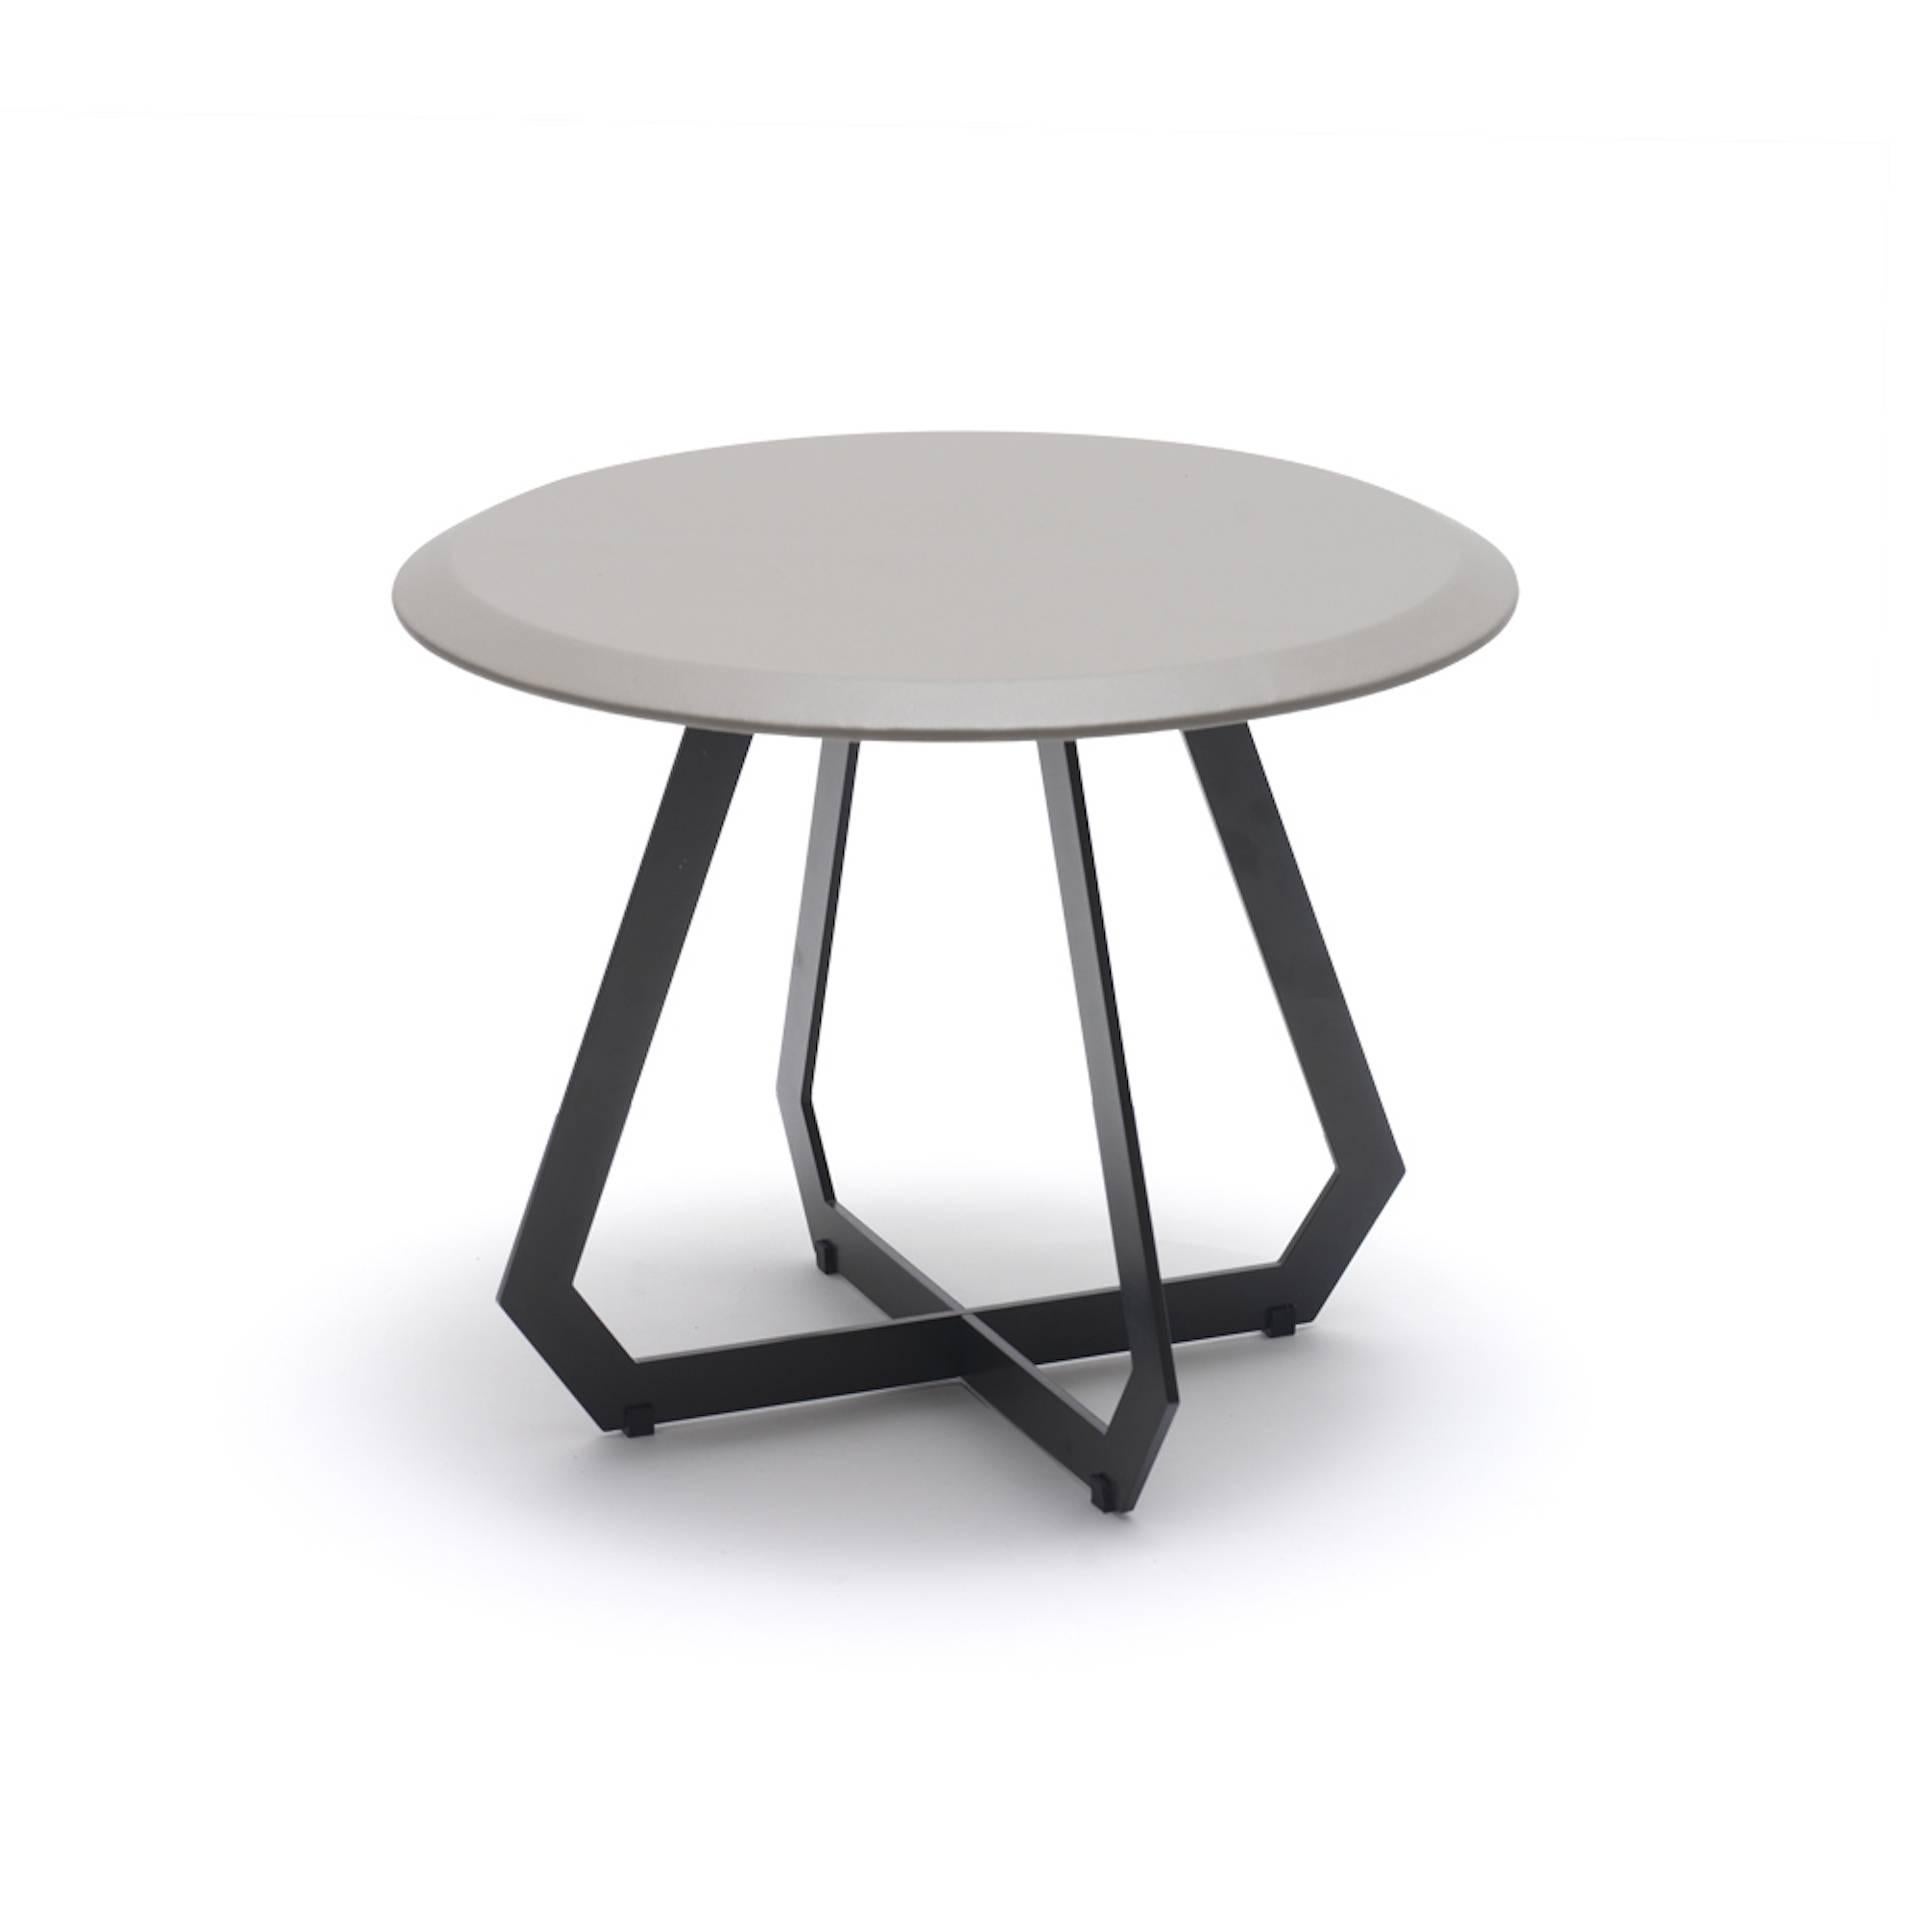 Danish design from Design by Us

The stylish geometric iron base combined with an elegant leather top will make a striking statement in your interior.

Base available in

Brass oxidized iron base 

Raw iron base with black zinc alloy